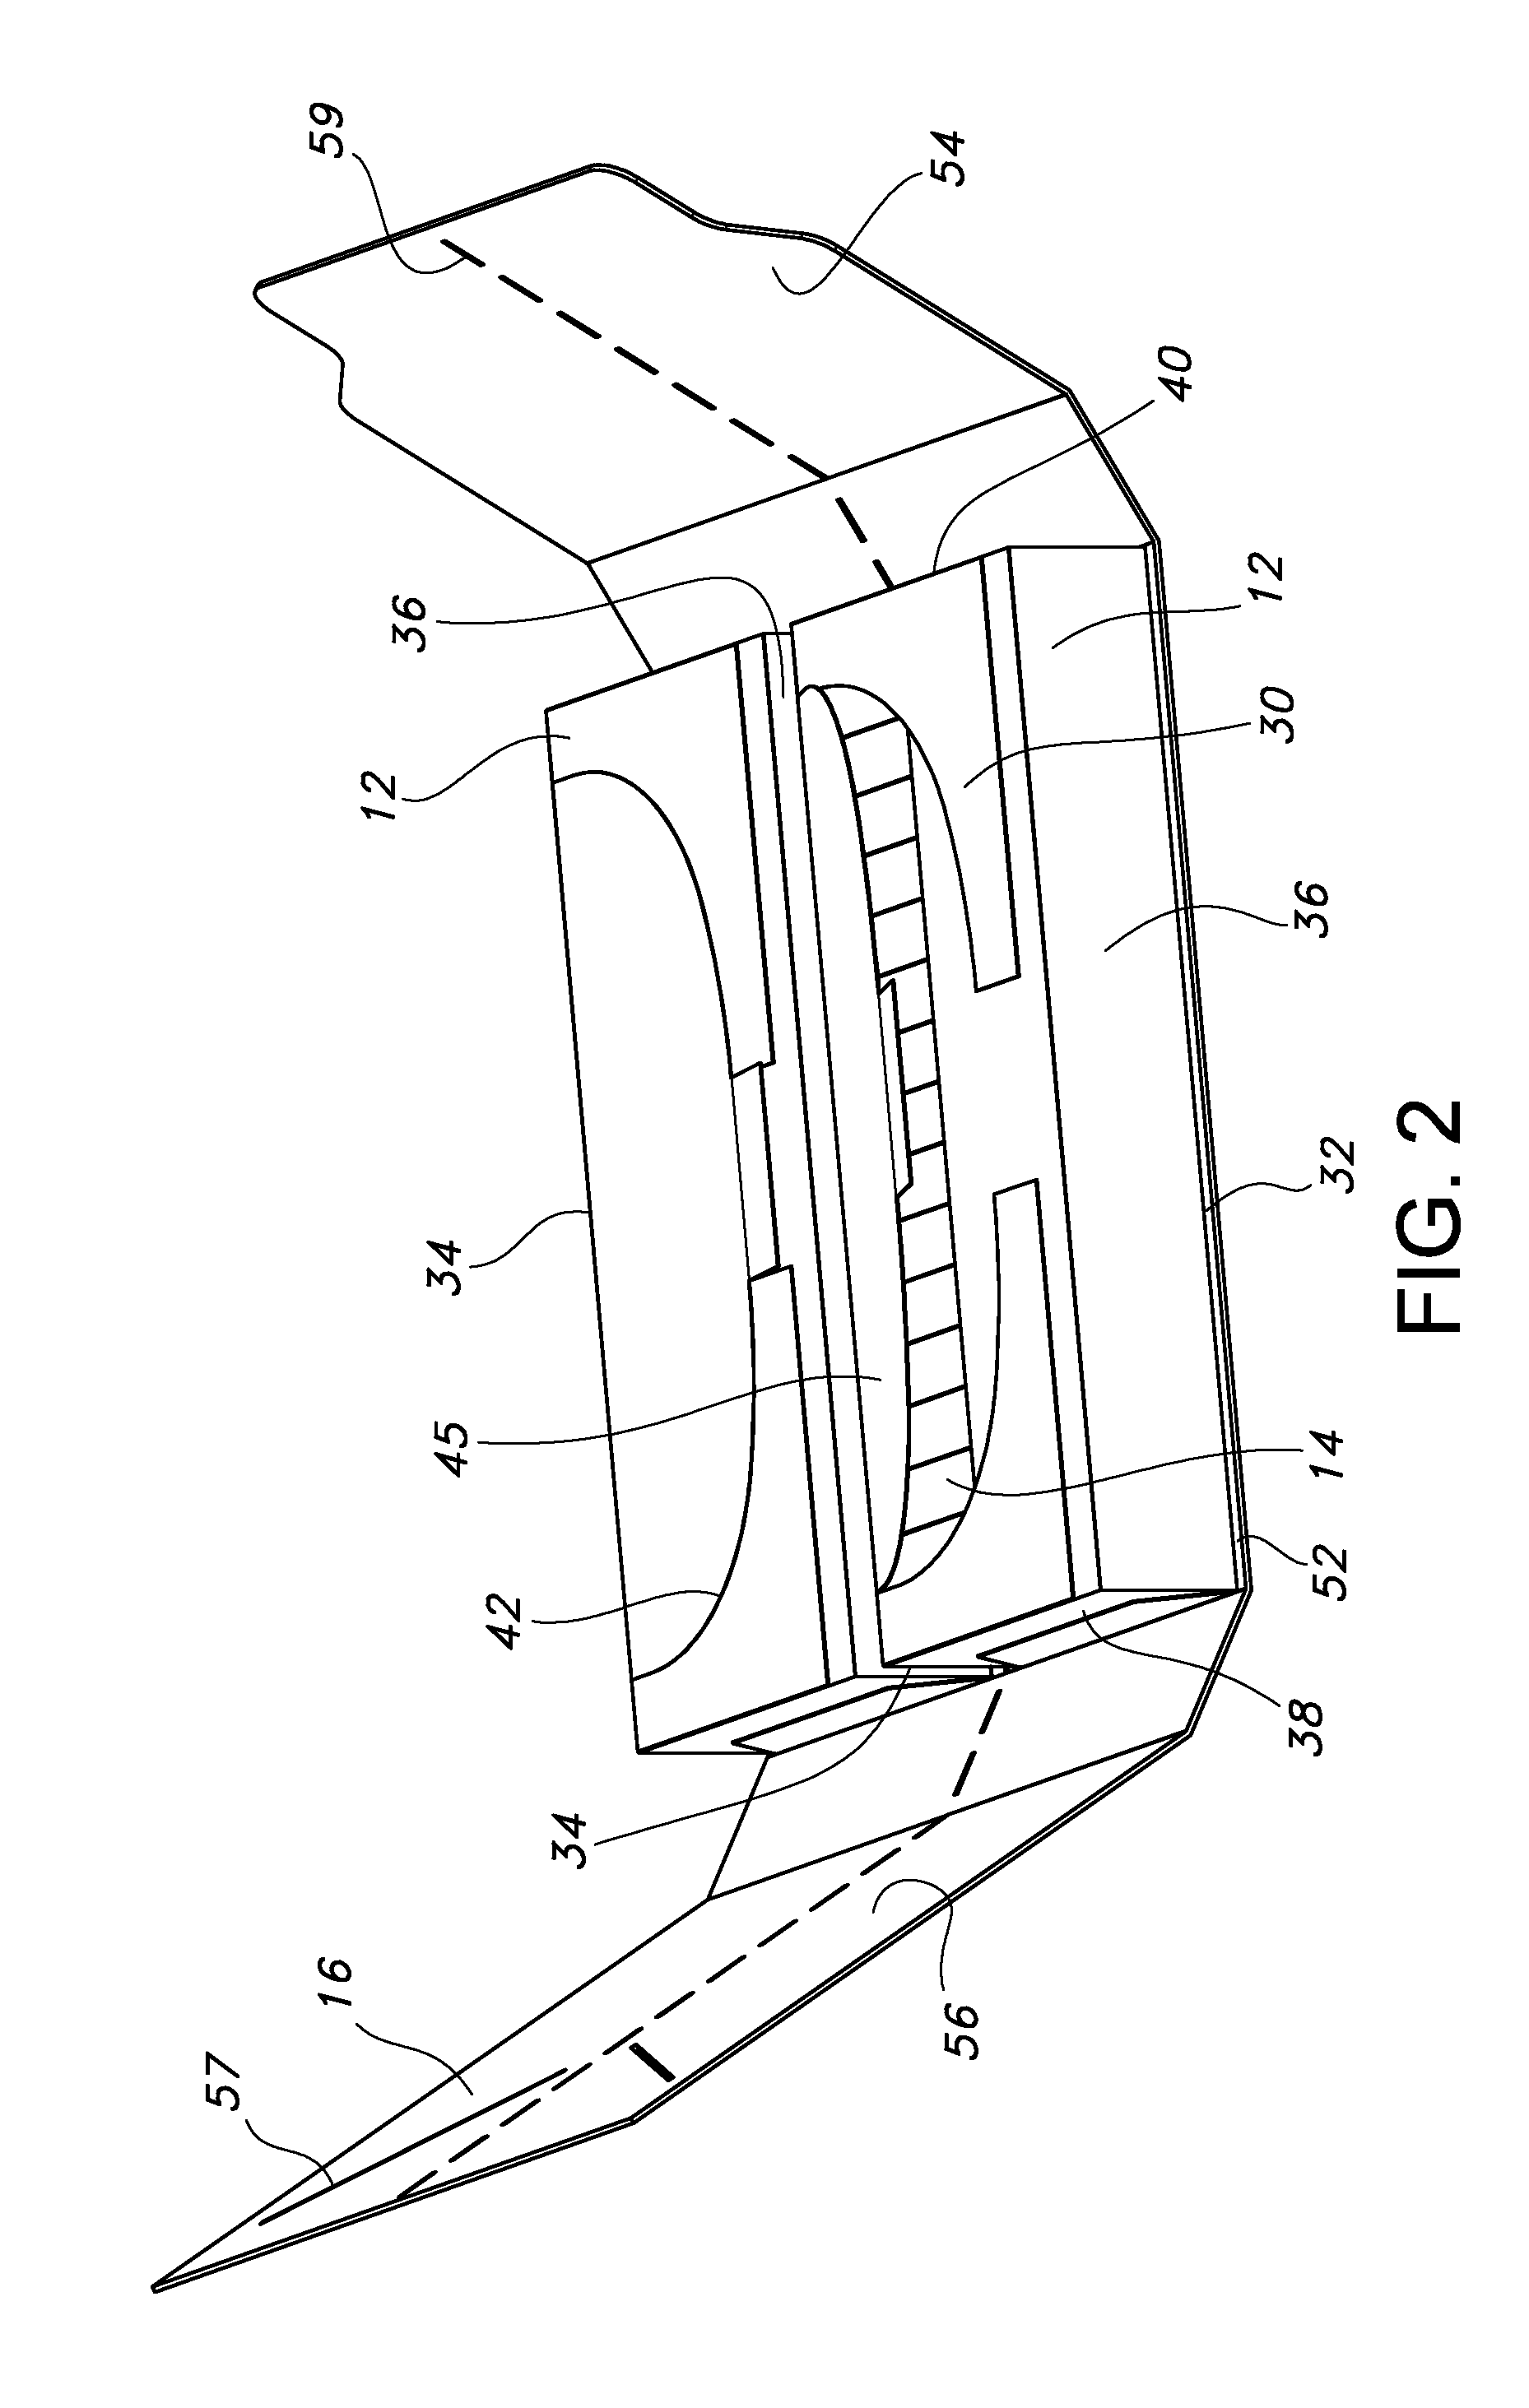 Package assembly for supporting a pair of consumable product packets